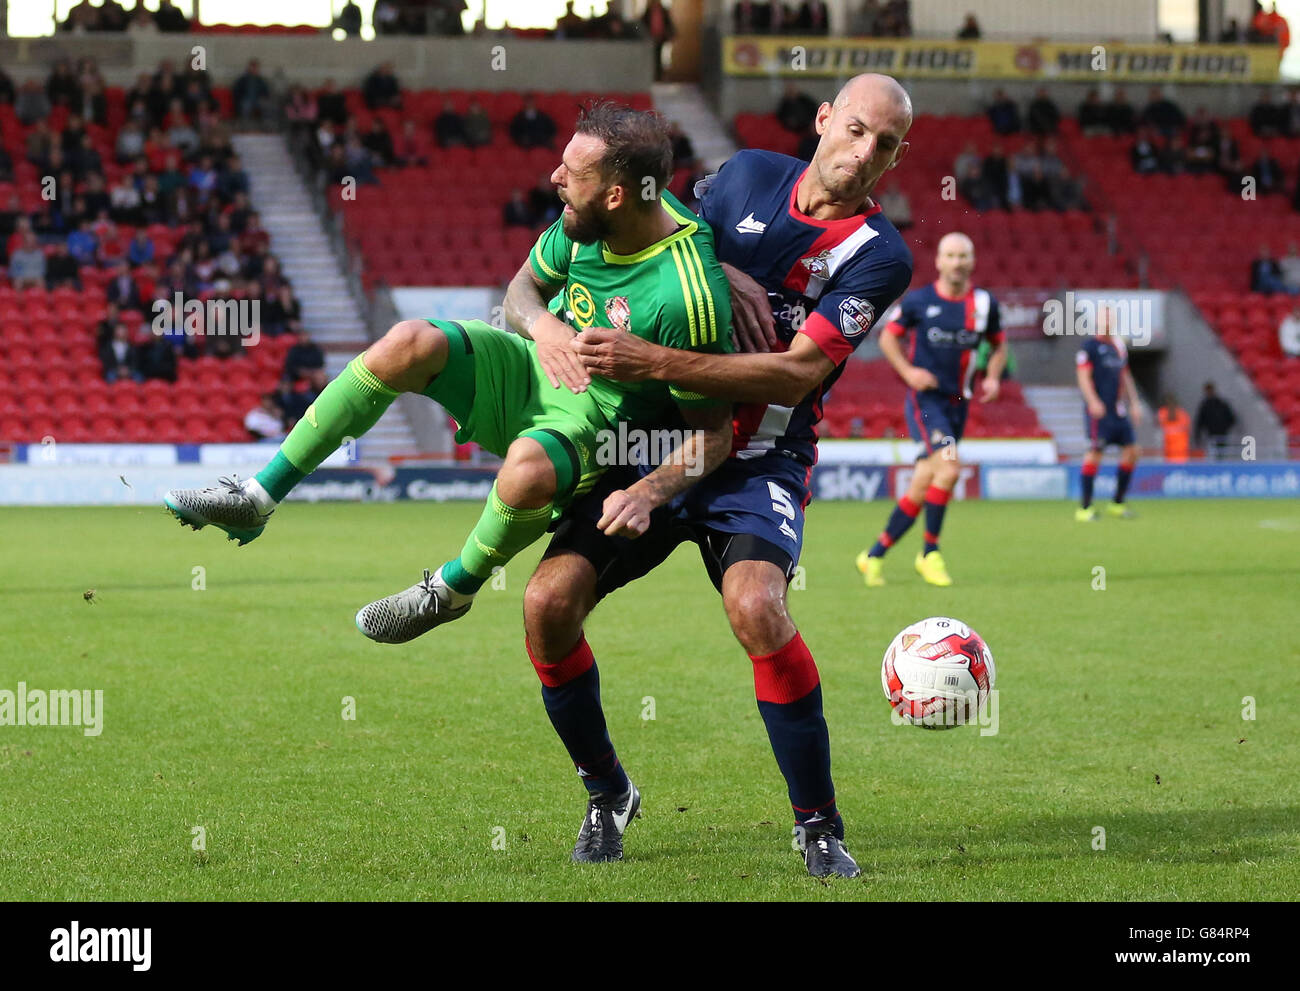 Sunderland's Steven Fletcher (left) and Doncaster Rovers' Rob Jones battle for the ball during the Pre-Season Friendly match at the Keepmoat Stadium, Doncaster. Stock Photo